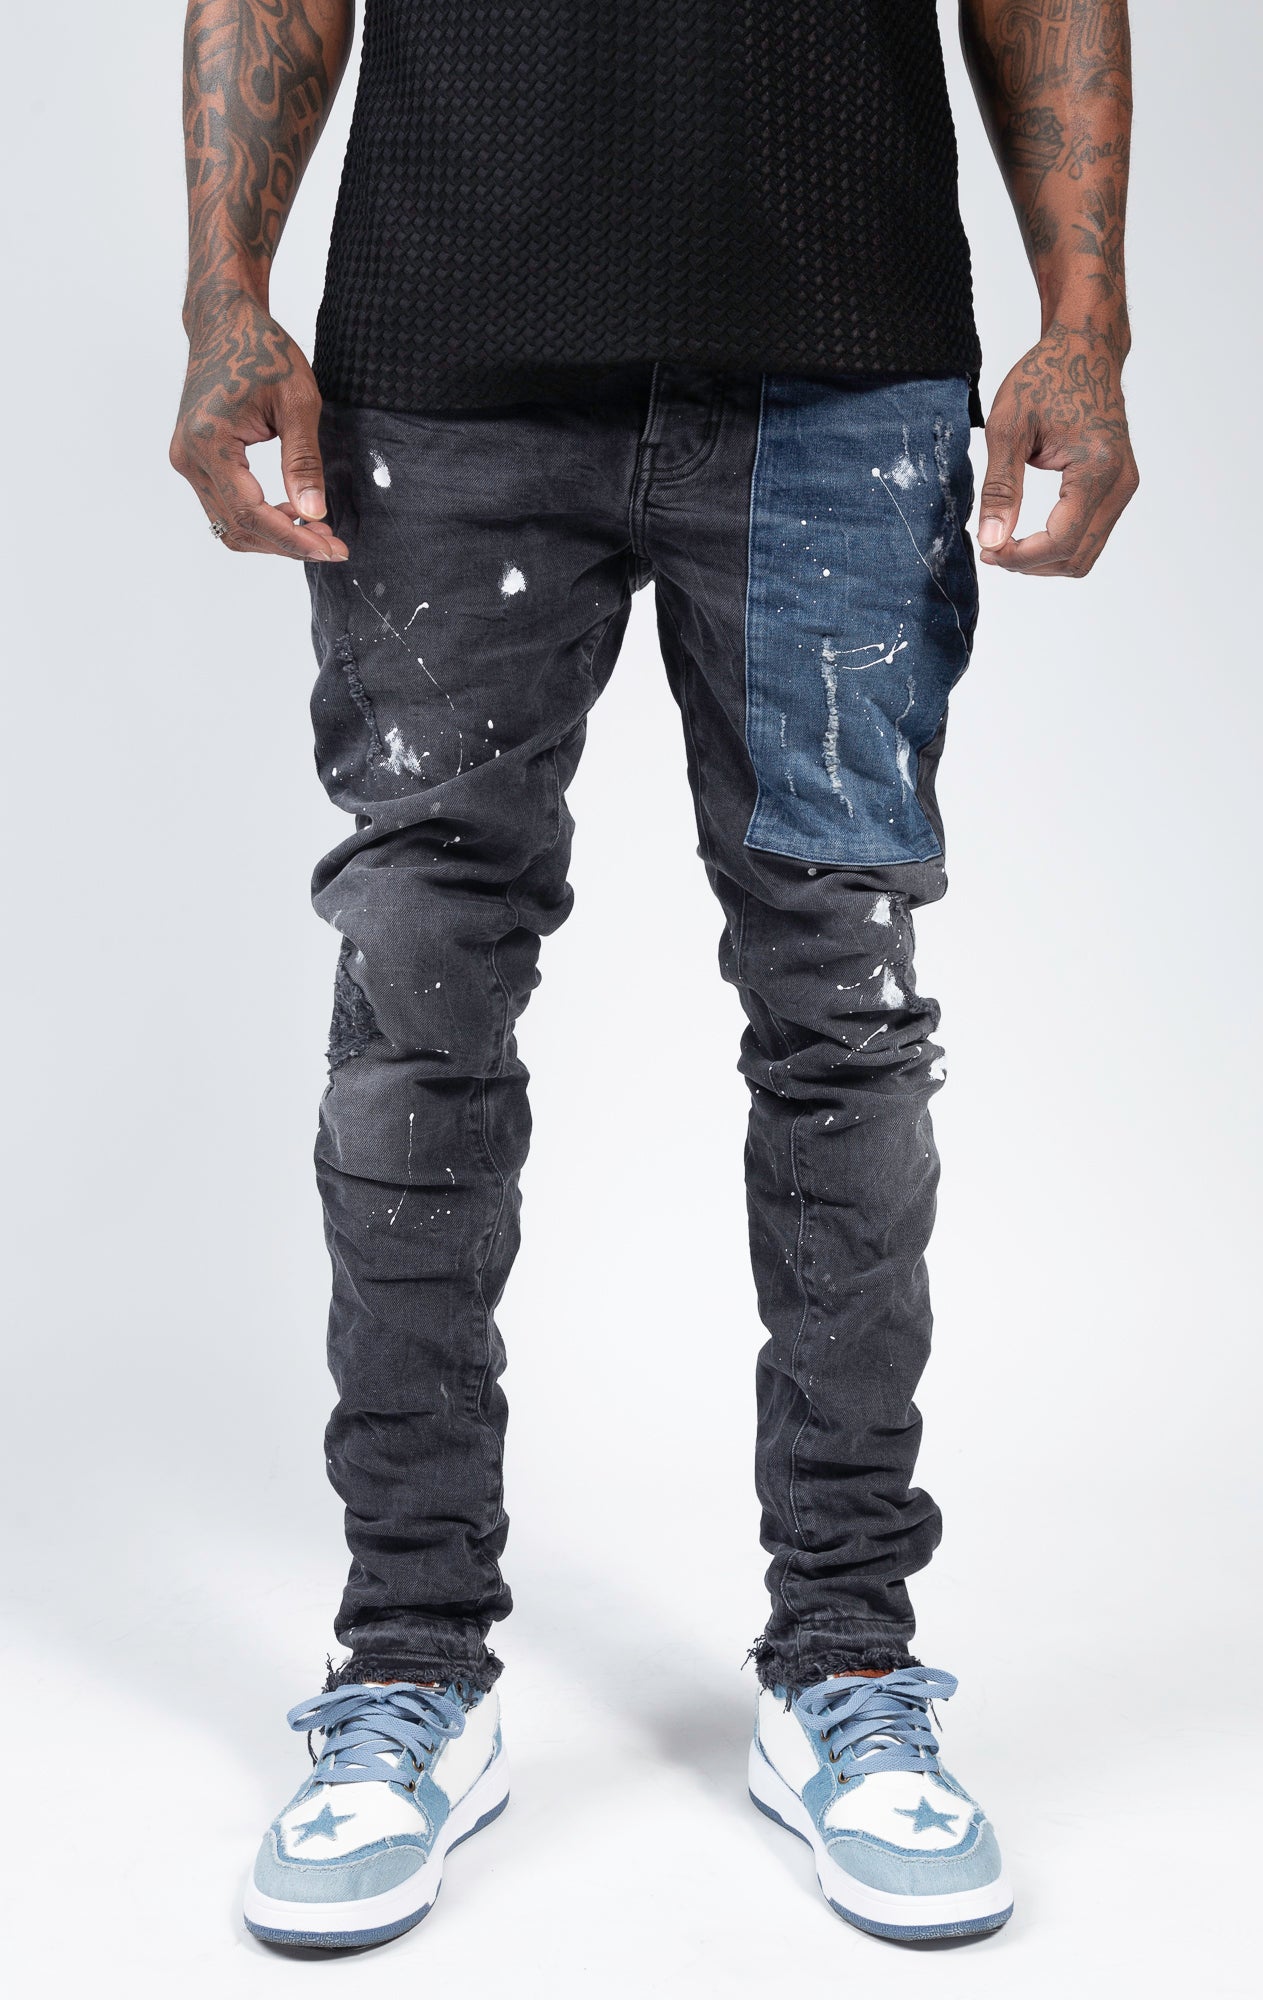 Ripped patchwork jeans with paint splatters.